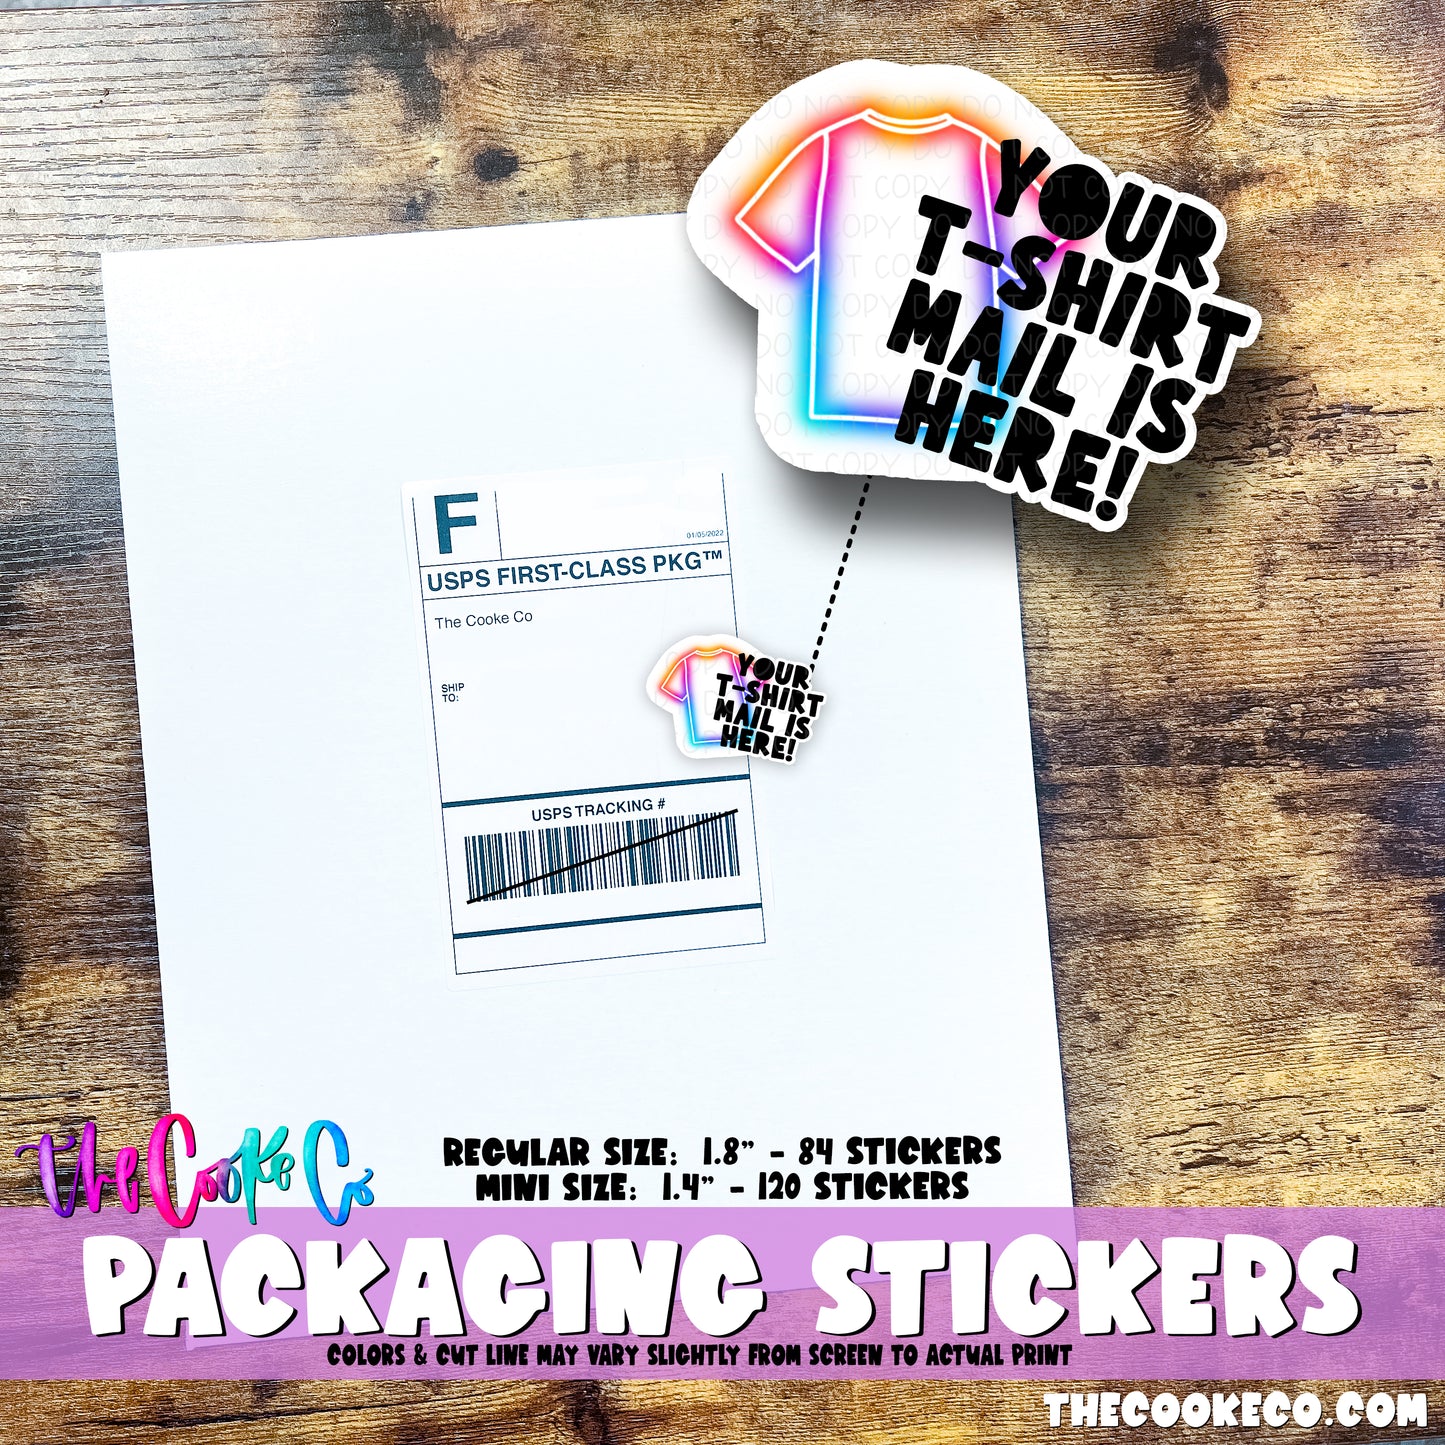 PTO Packaging Stickers | #C0834 - YOUR T-SHIRT MAIL IS HERE